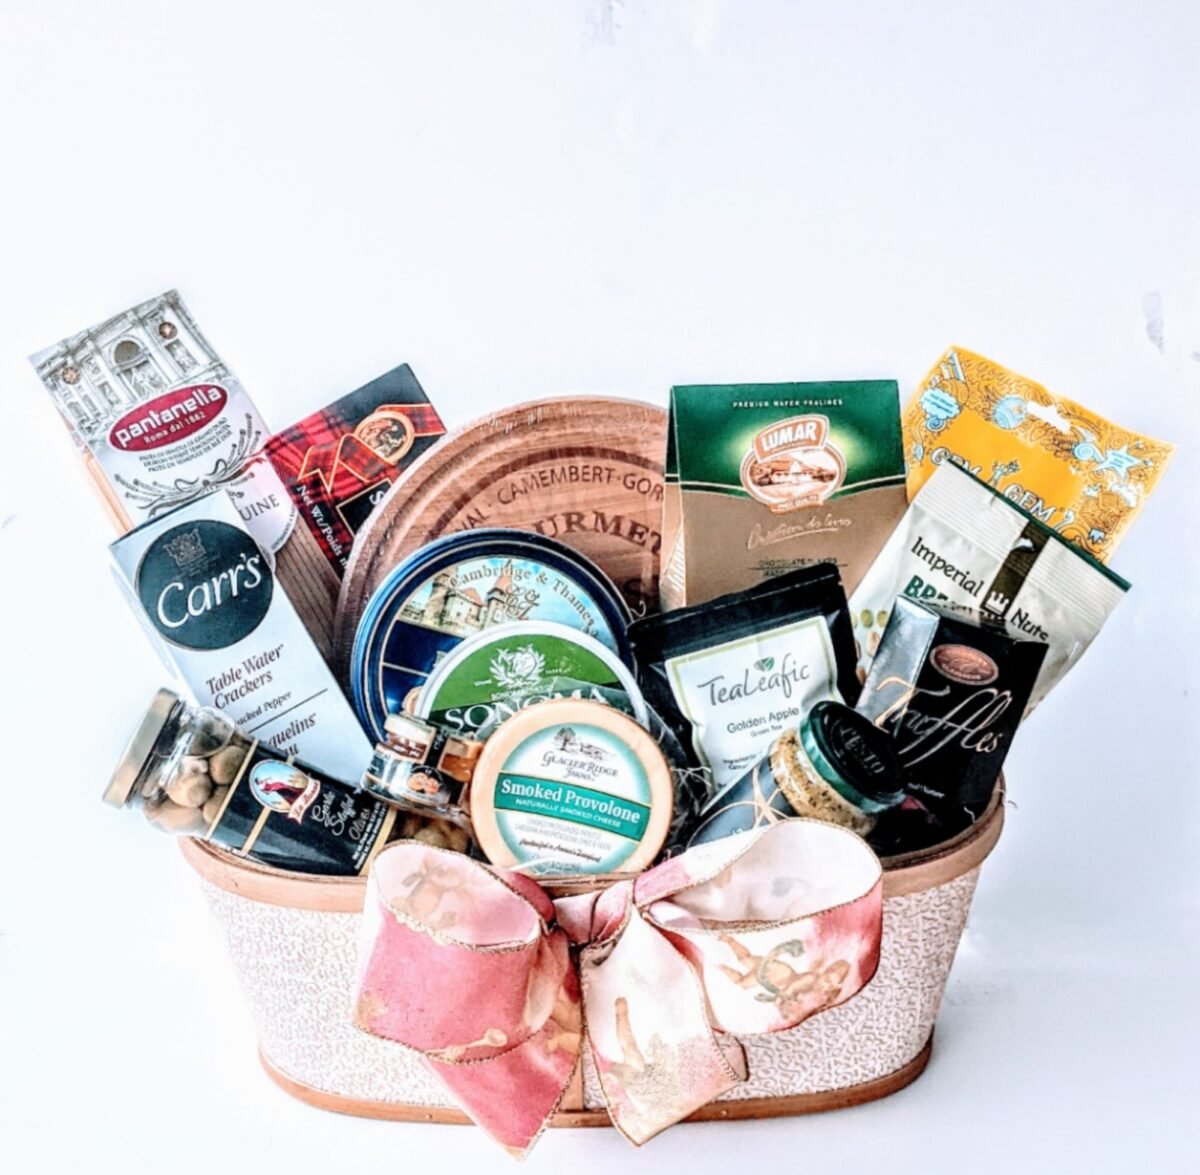 Gift basket’s for the office staff, colleagues, family and friends. Corporate gifts baskets for all occasions.